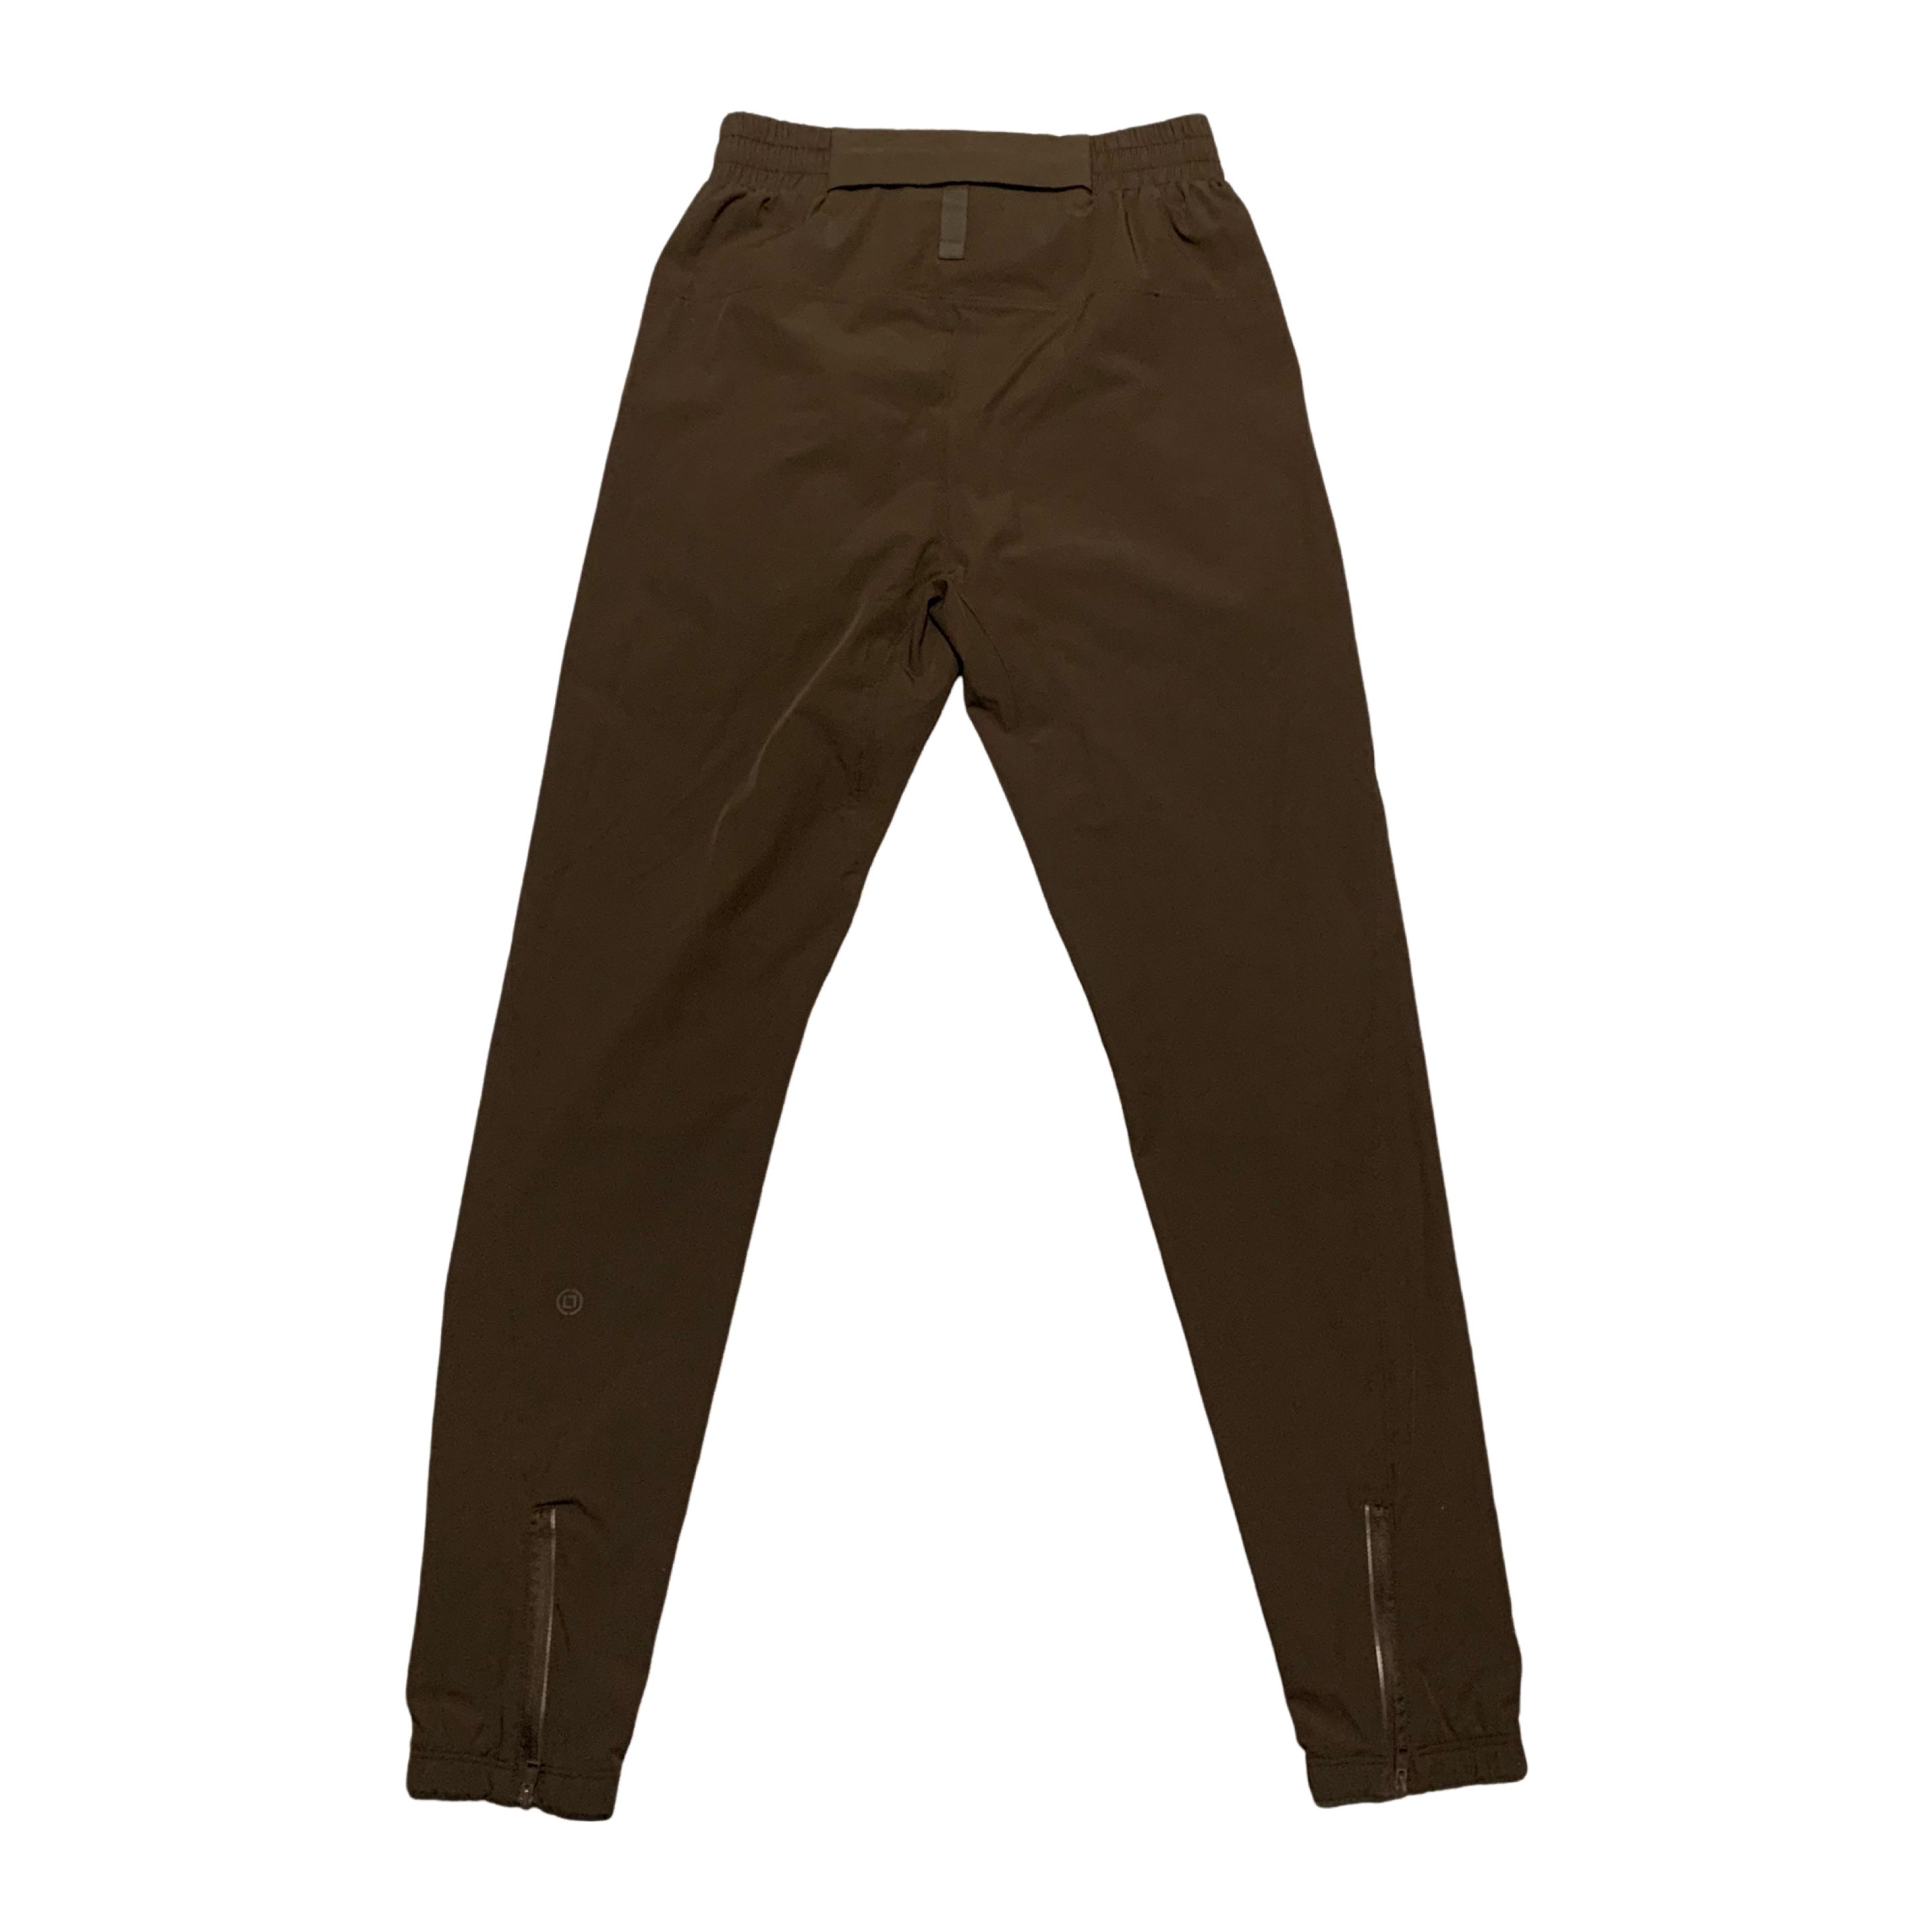 Represent Small 247 Brown Track Pant Bottoms